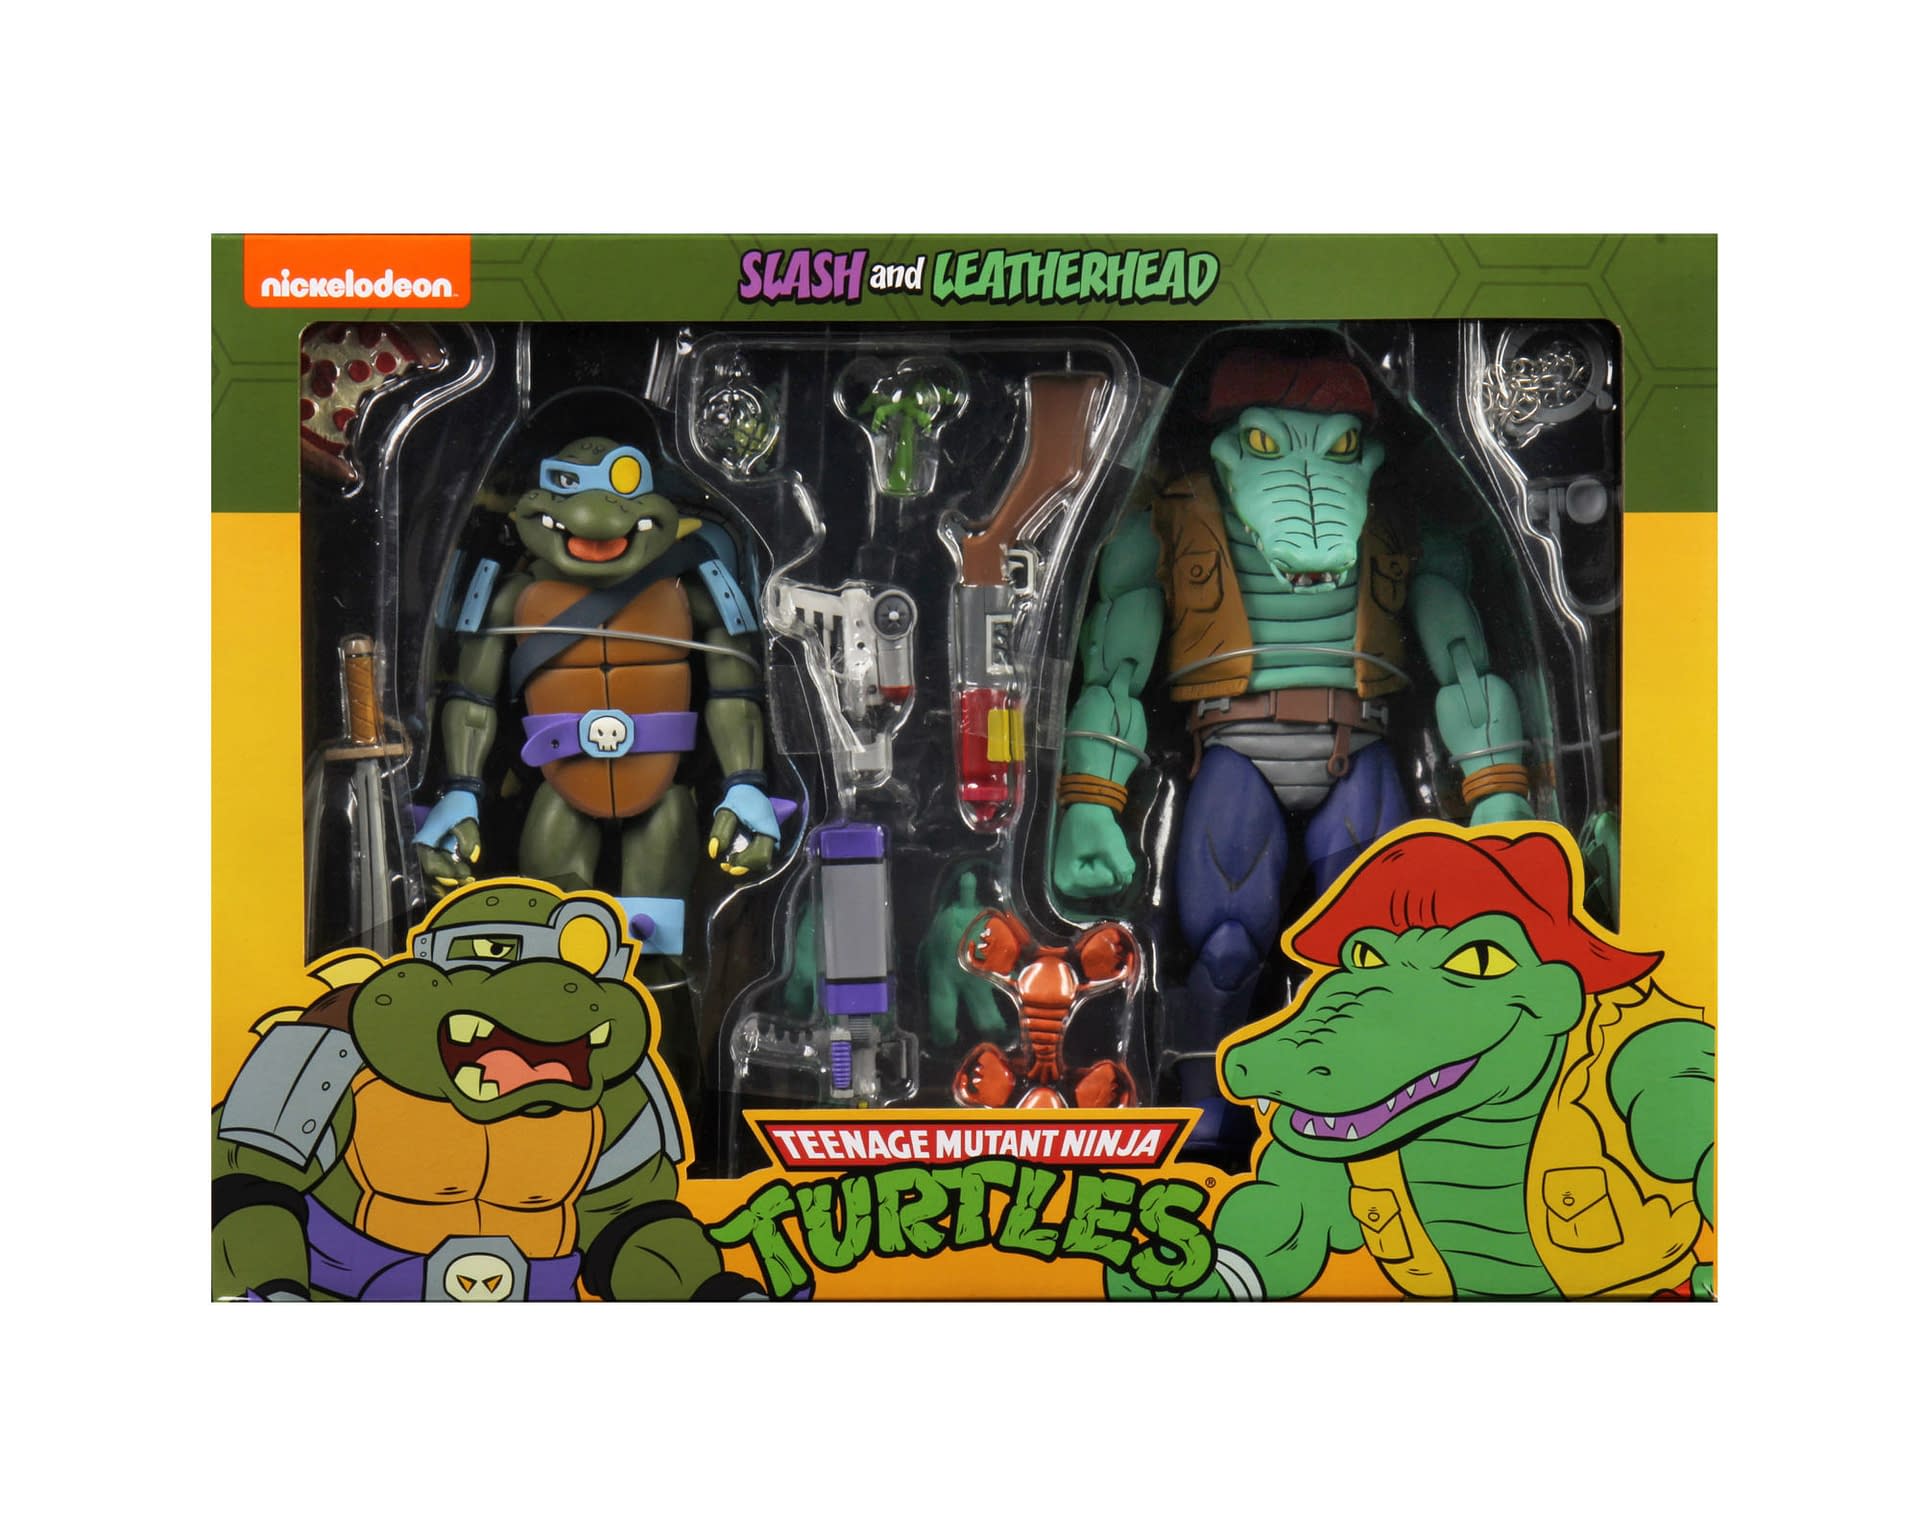 NECA Selling Hard To Get TMNT Figures On Black Friday